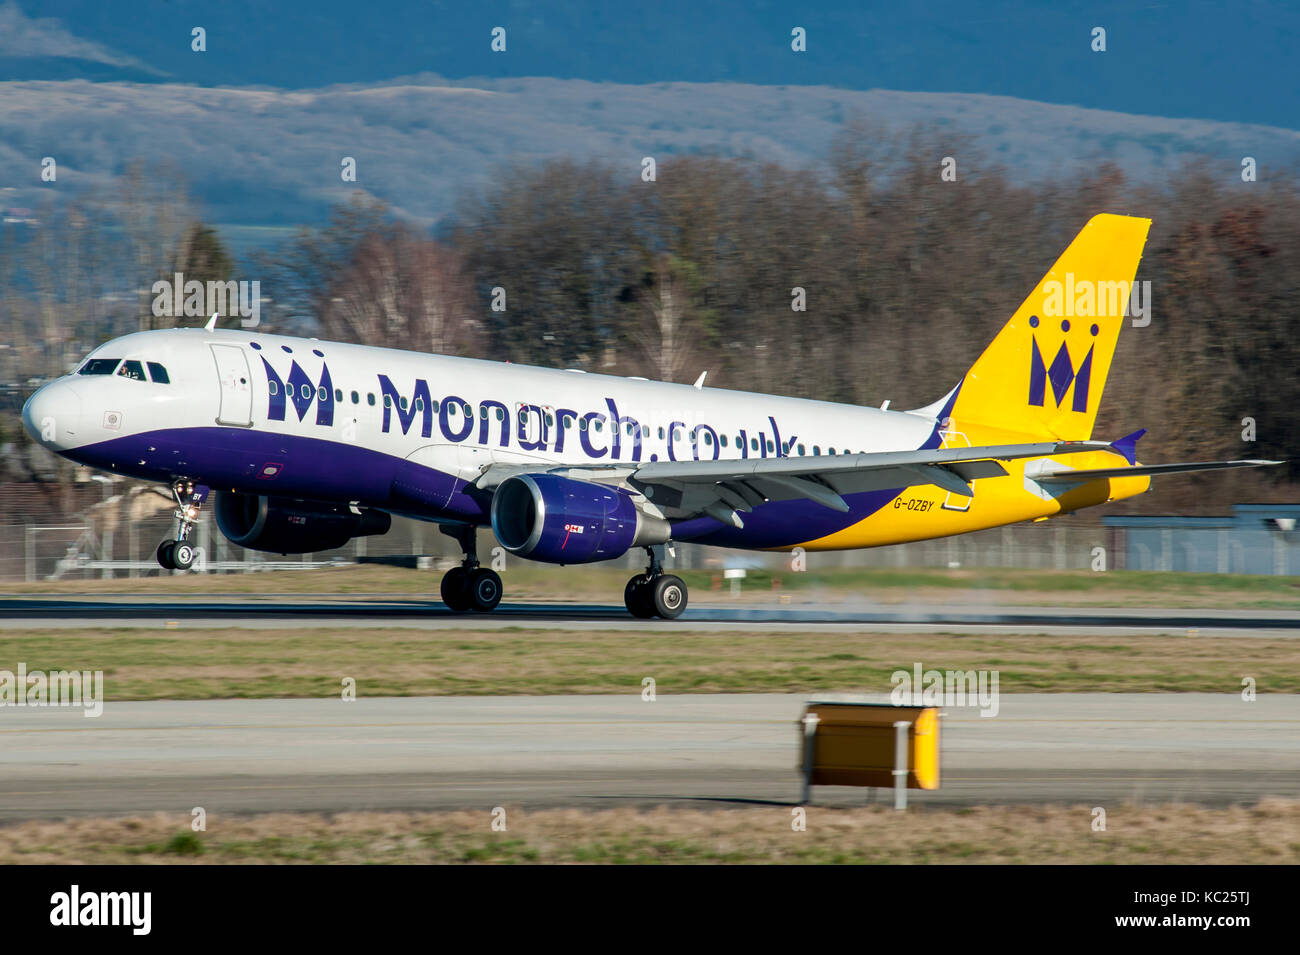 Airbus A320 Monarch Airline. October 2, 017 The british company has failed. Founded on June 5, 1967 by Bill Hodgson based at Luton Airport. A300 B757 Stock Photo